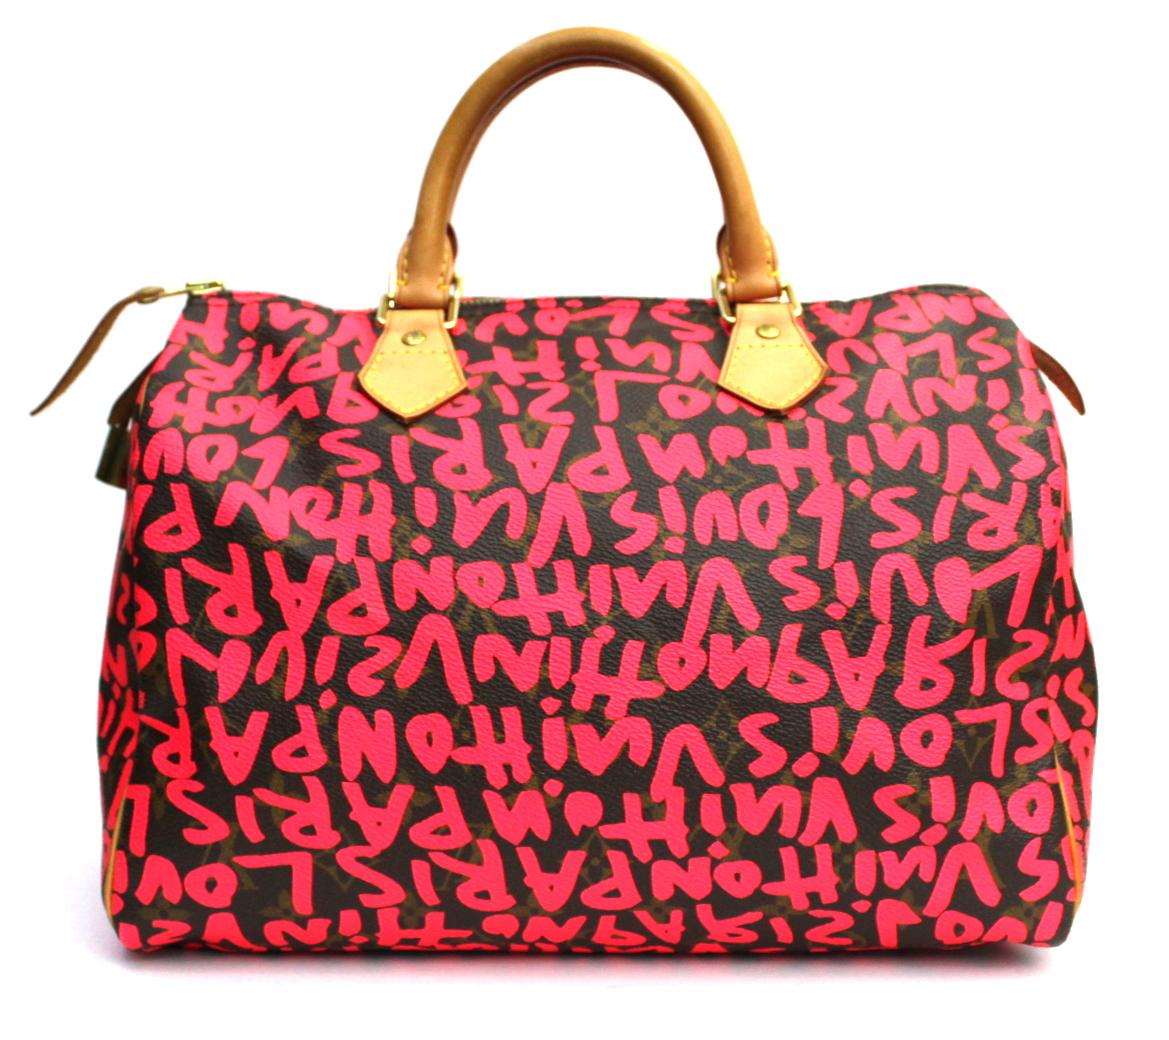 This limited edition Louis Vuitton Graffiti Sprouse Speedy 30 presents the monogram canvas with the iconic pattern covered with fluorescent graffiti. The Speedy was designed after the iconic Keepall and has always been popular. With its